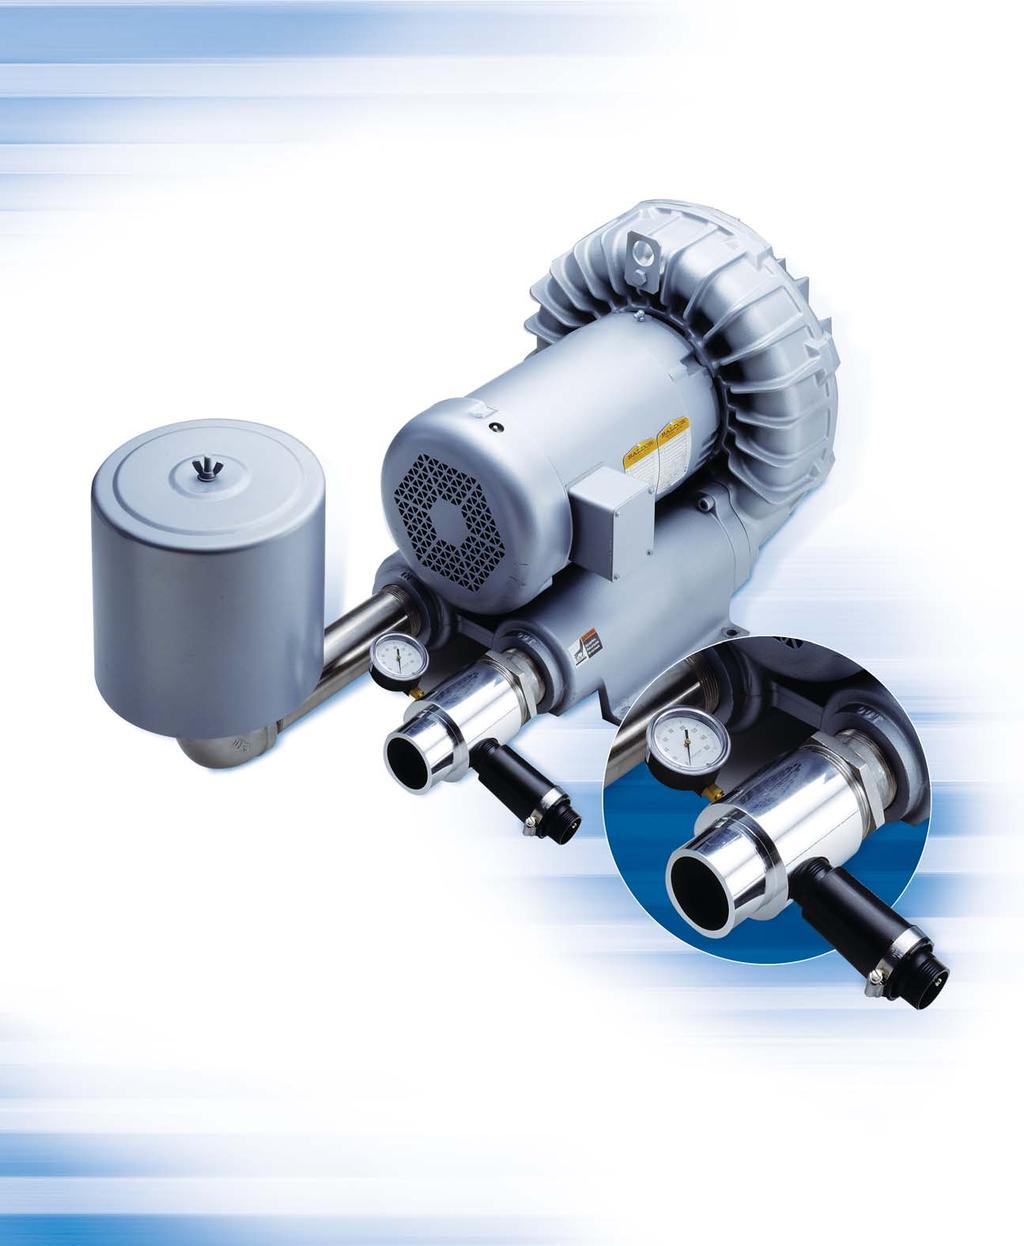 Blower Assembly Components Air Inlet Filter Keeps particles from entering the blower, ensuring smooth operation and trouble-free service. Filters come with all blower assemblies.